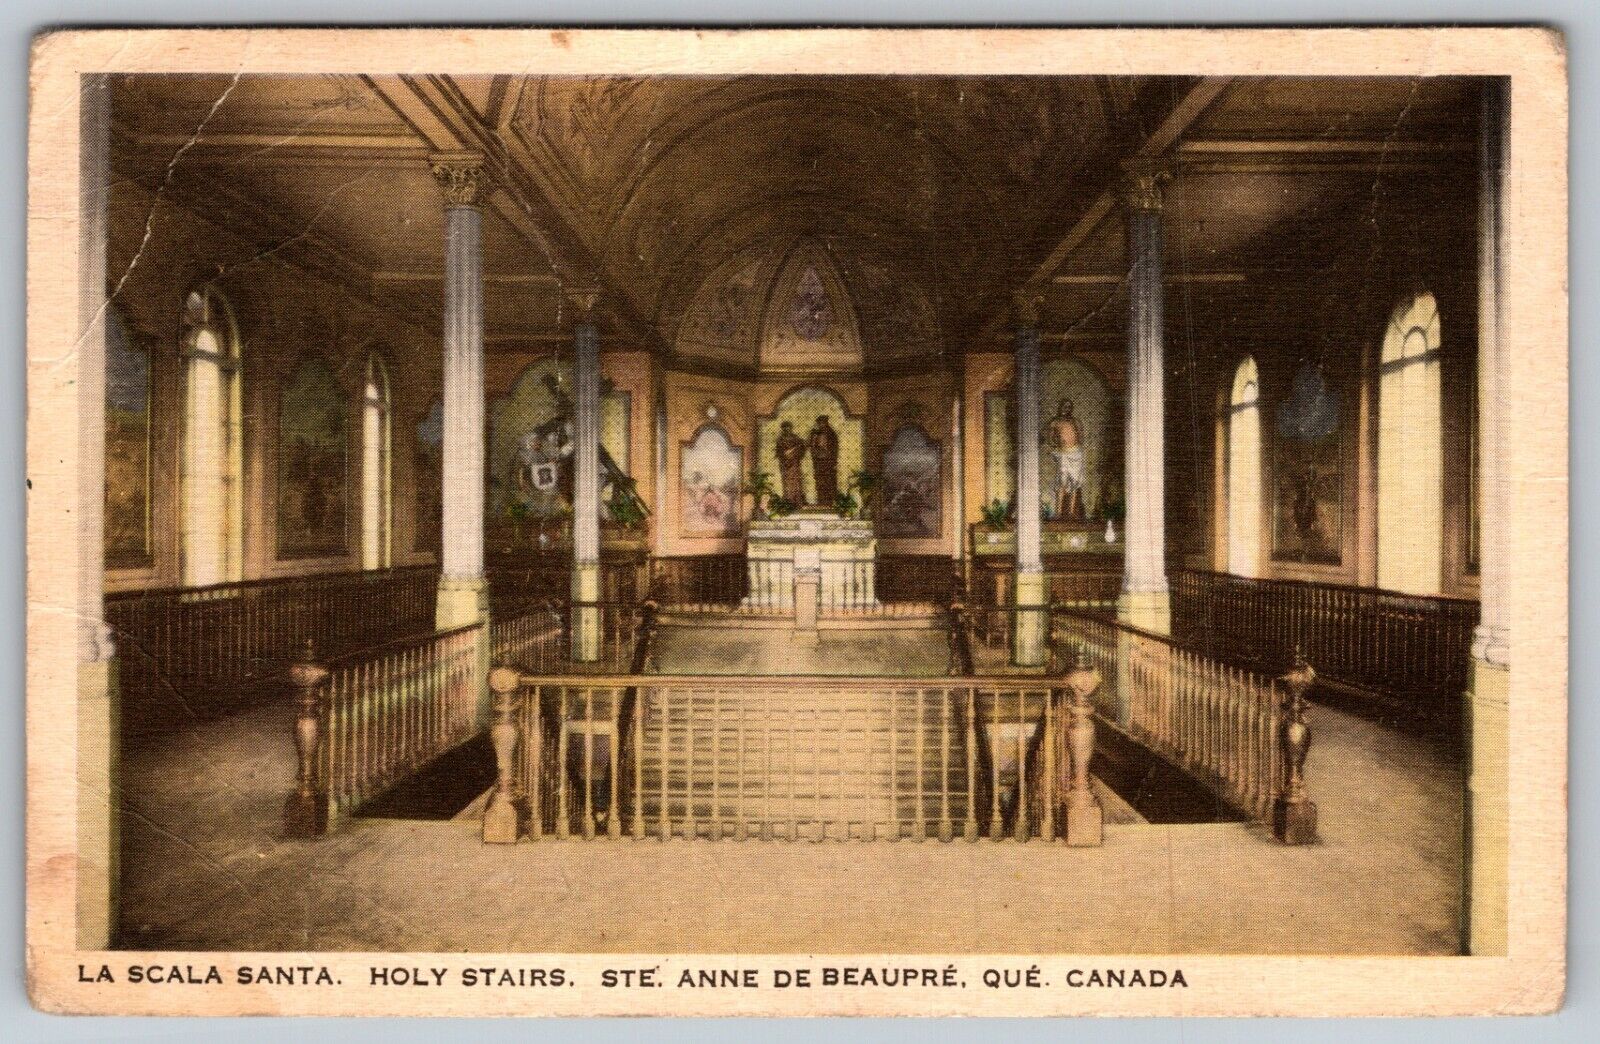 THE HOLY STAIRS IN SCALA SANTA STE ANNE DE BEAUPRE CANADA RARE VIEW VTG POSTCARD